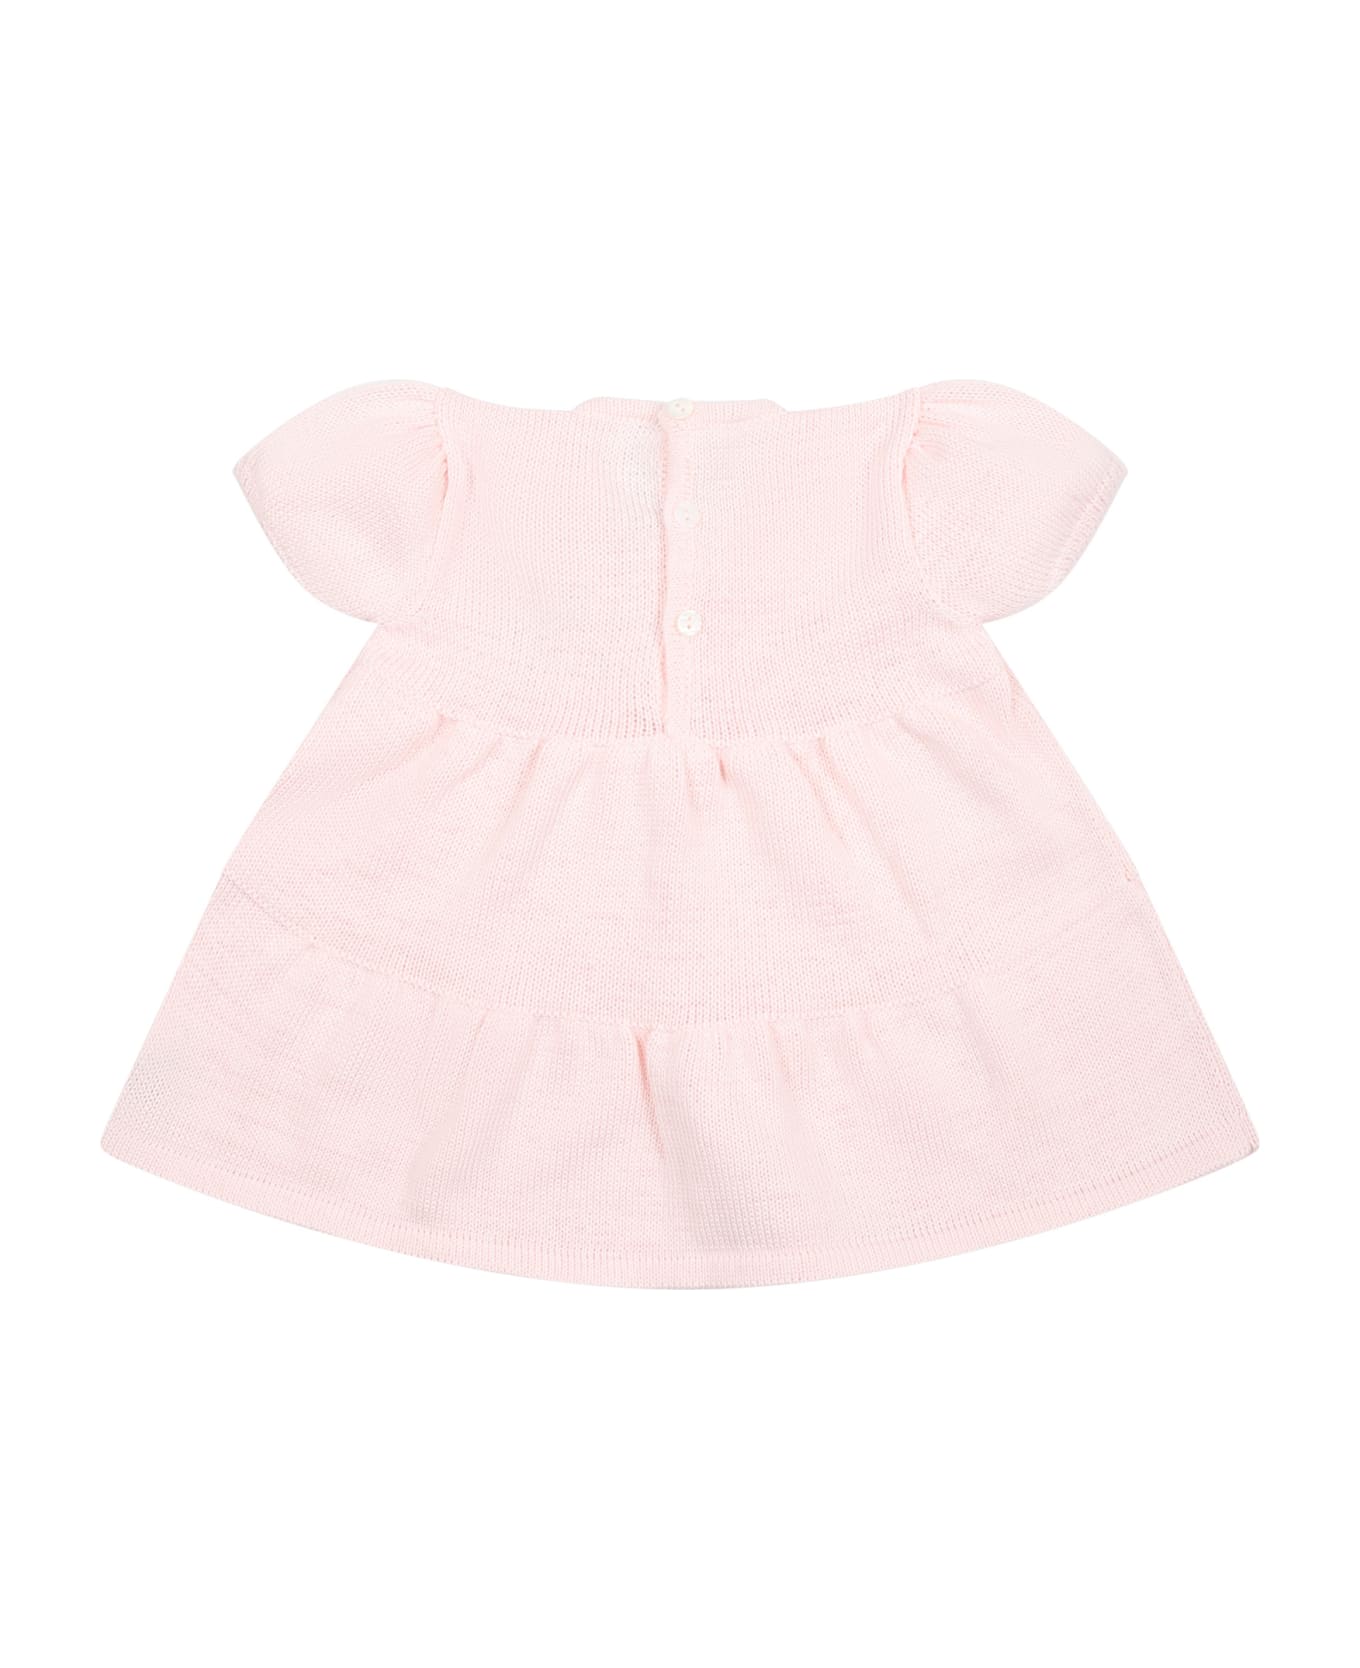 Little Bear Pink Casual Dress For Baby Girl - Pink ウェア